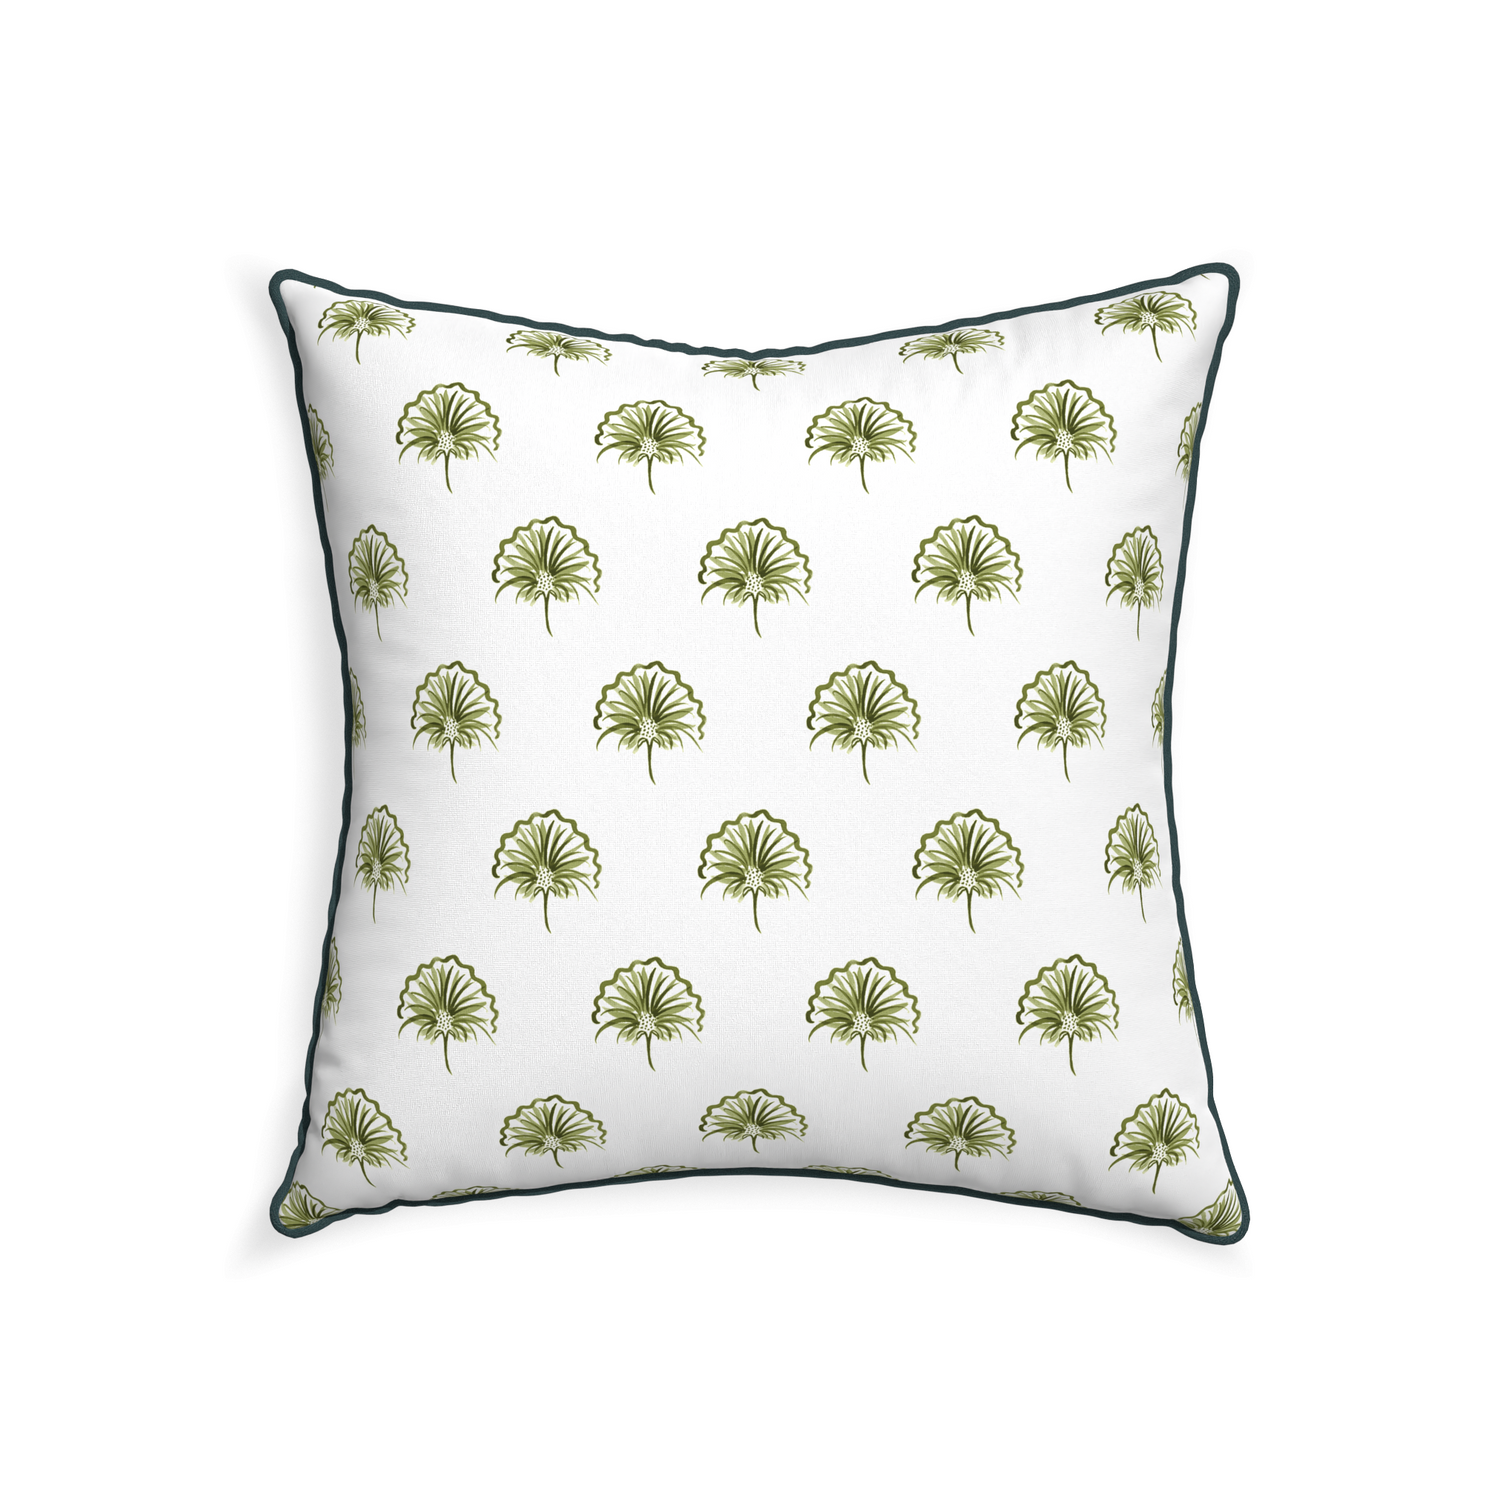 22-square penelope moss custom green floralpillow with p piping on white background